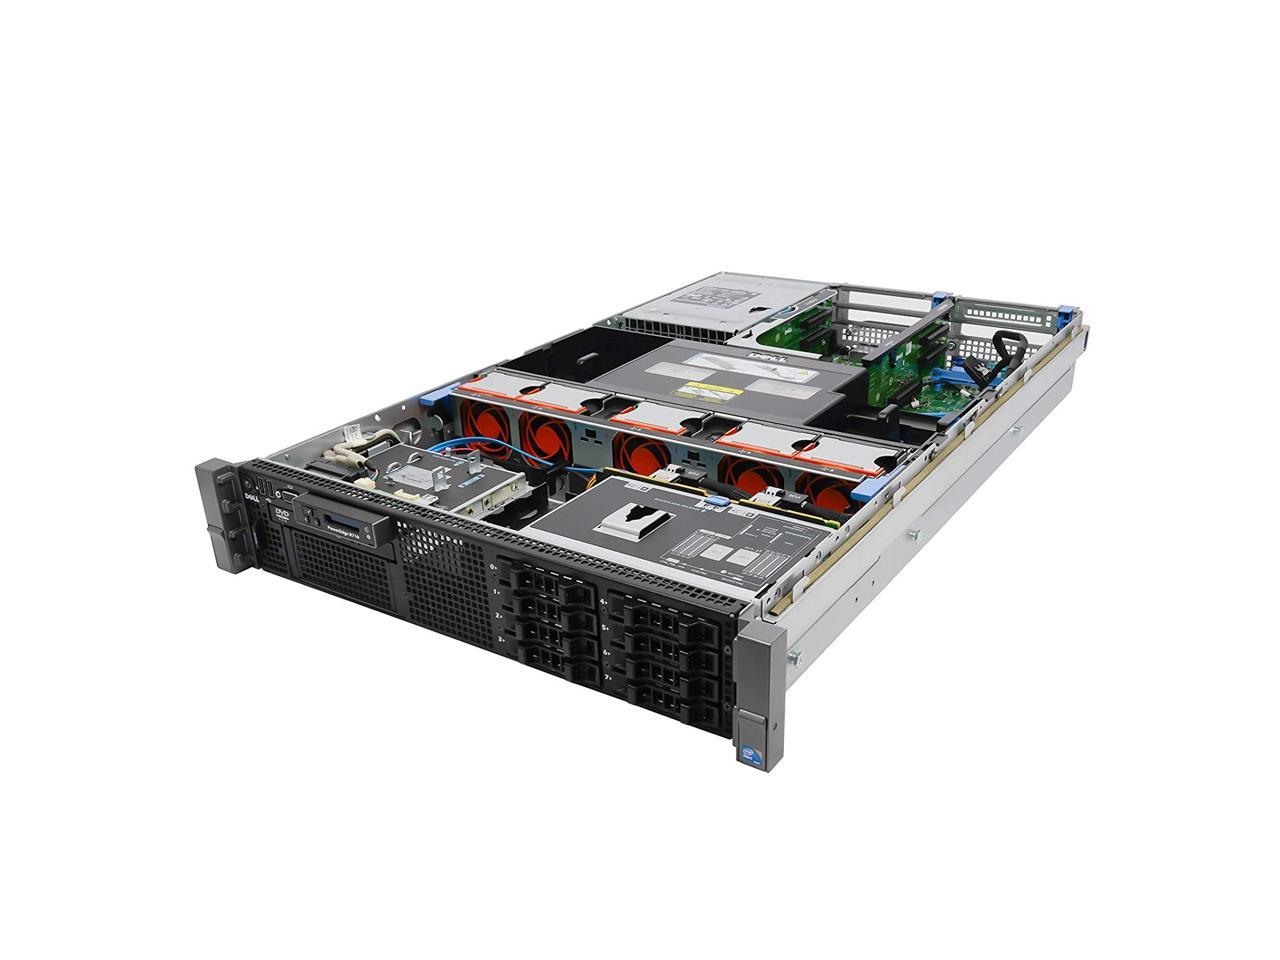 Used - Like New: High-End DELL PowerEdge R710 Server 2X 2.80Ghz X5560